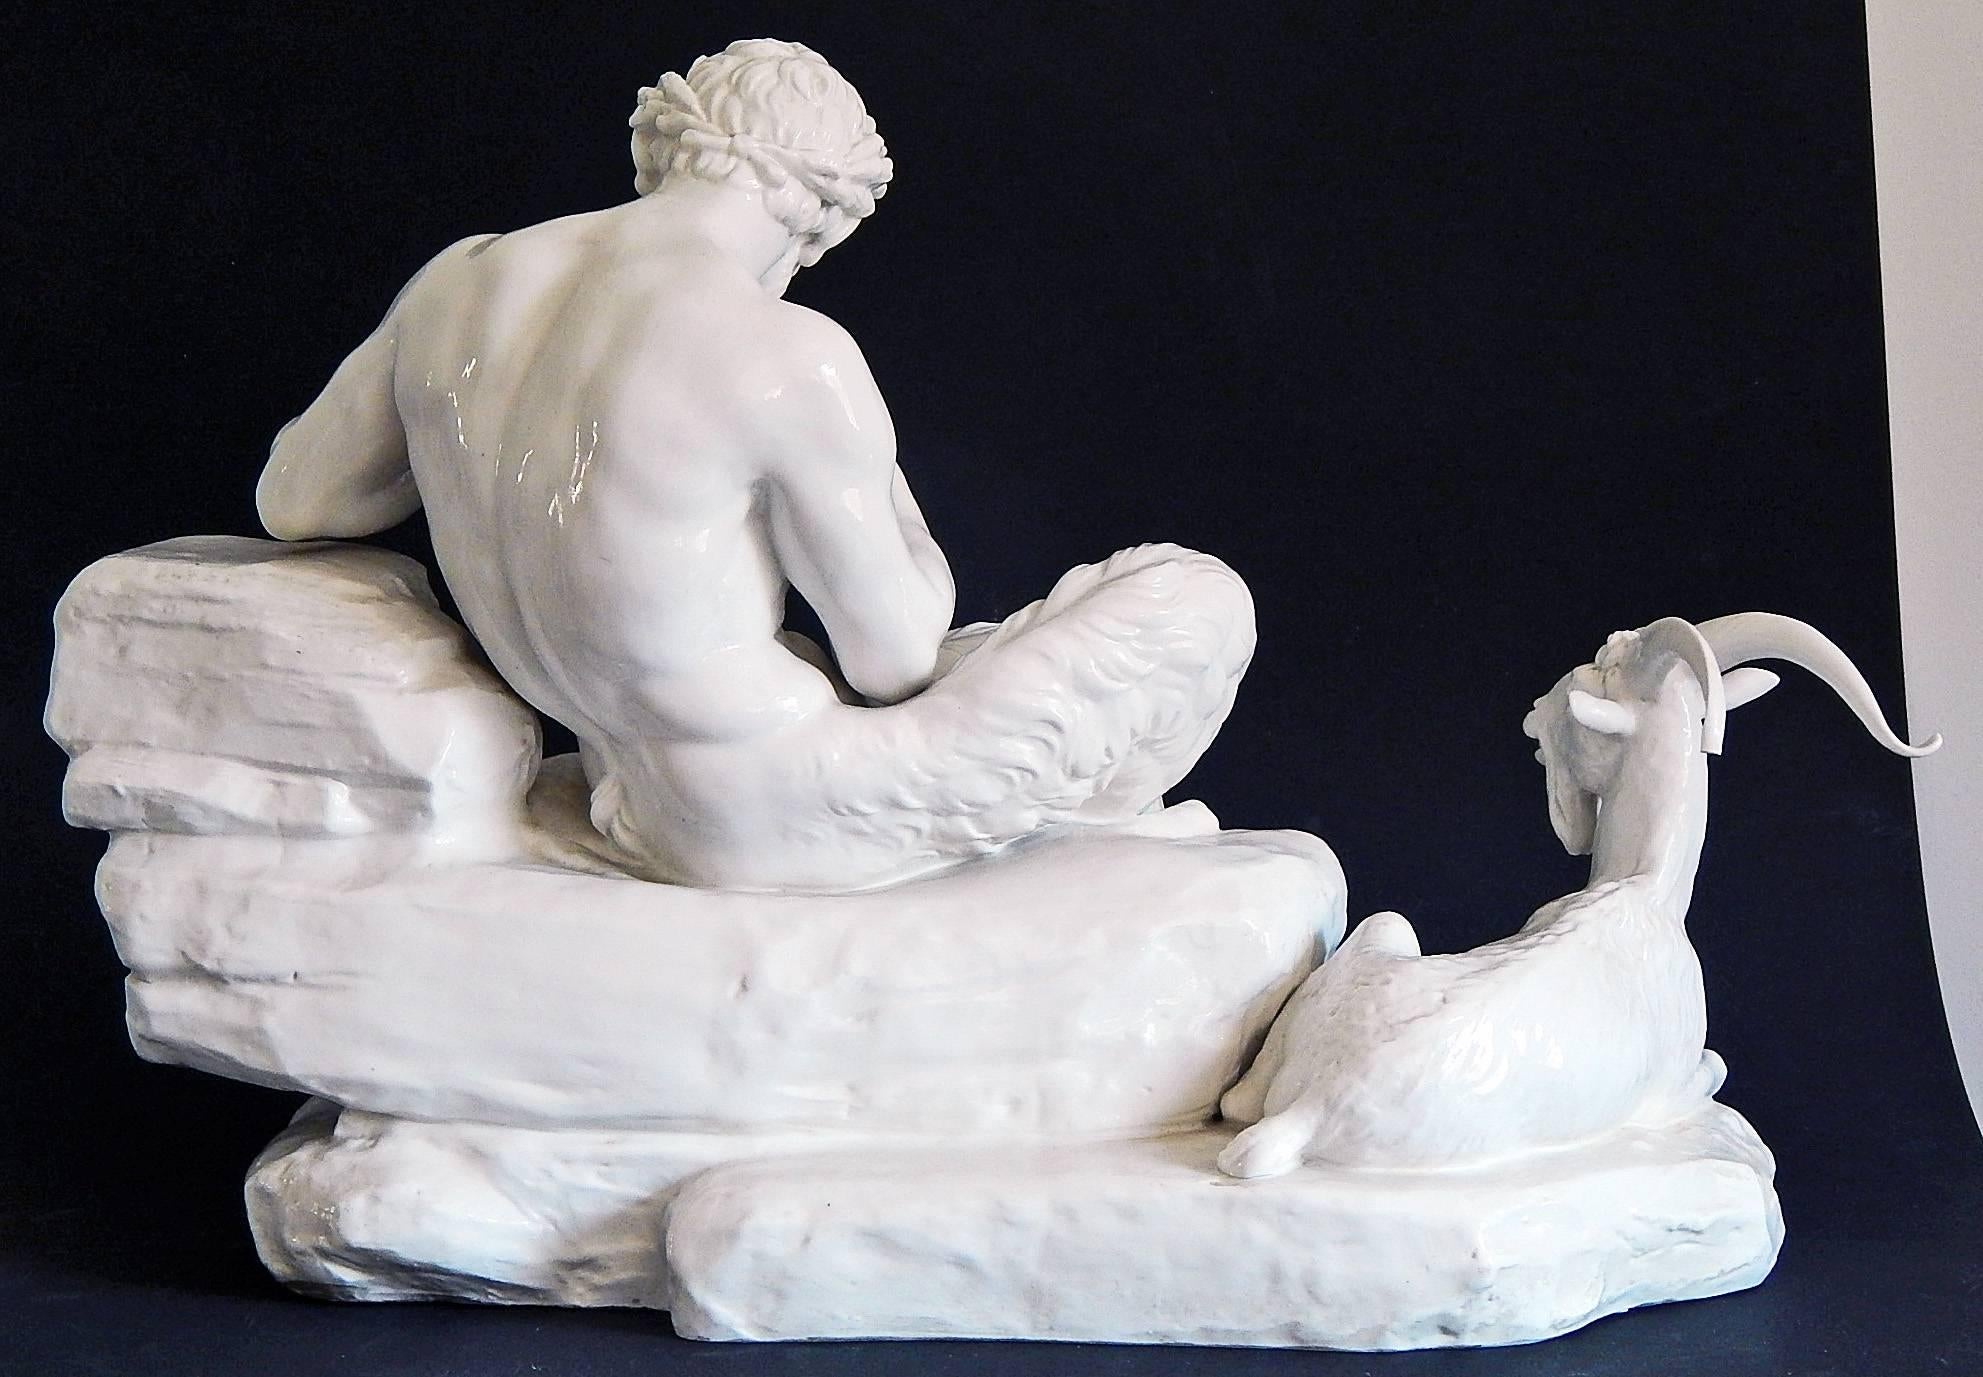 Modeled after a famous sculpture dating to 1815 by Peter Simon Lamine, located in the Schlosspark Nymphenburg in Munich, Germany, and created by the famous Nymphenburg Porcelain works about a century later, this large and finely detailed sculpture